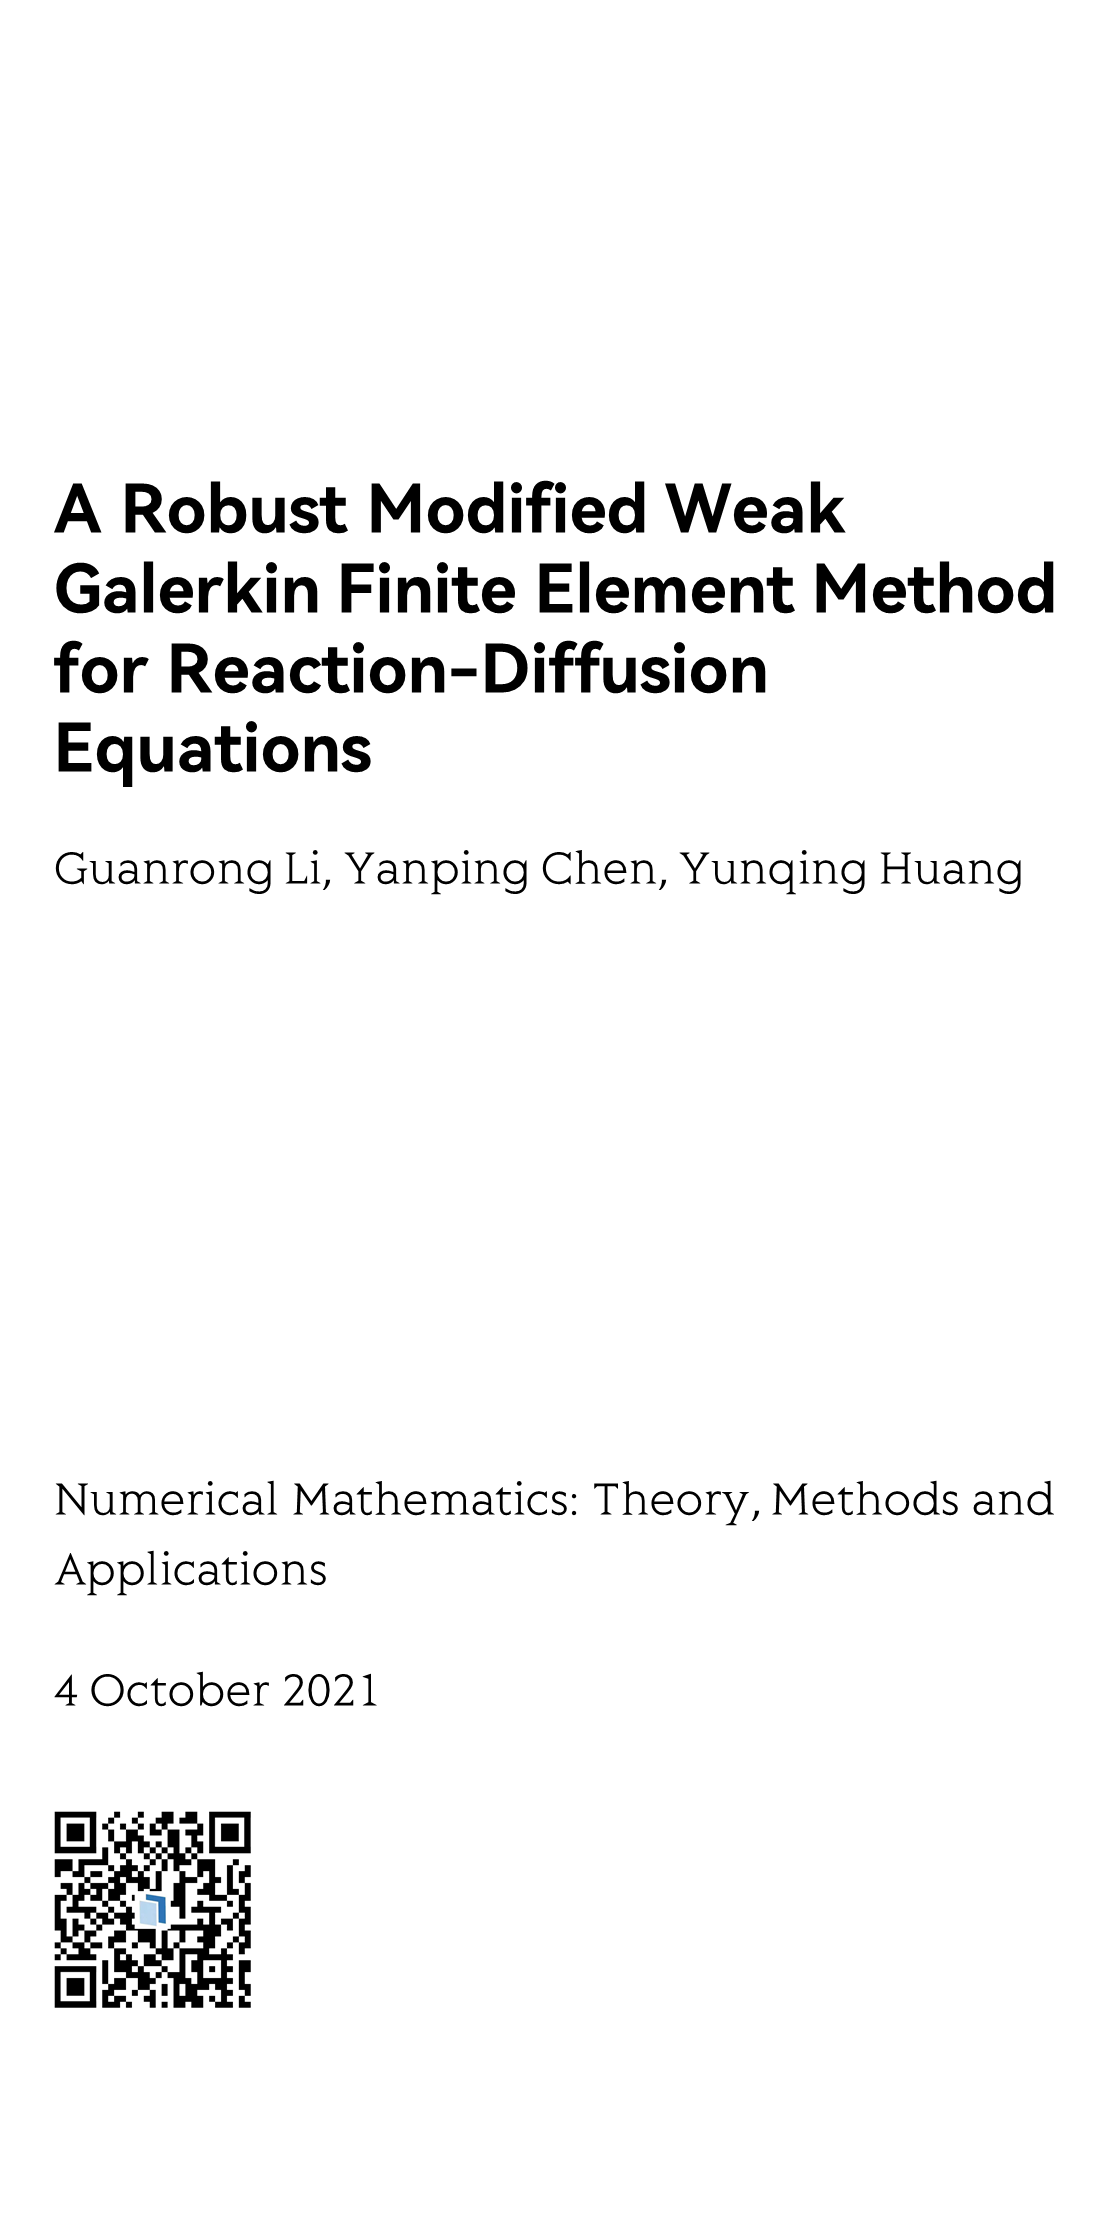 A Robust Modified Weak Galerkin Finite Element Method for Reaction-Diffusion Equations_1